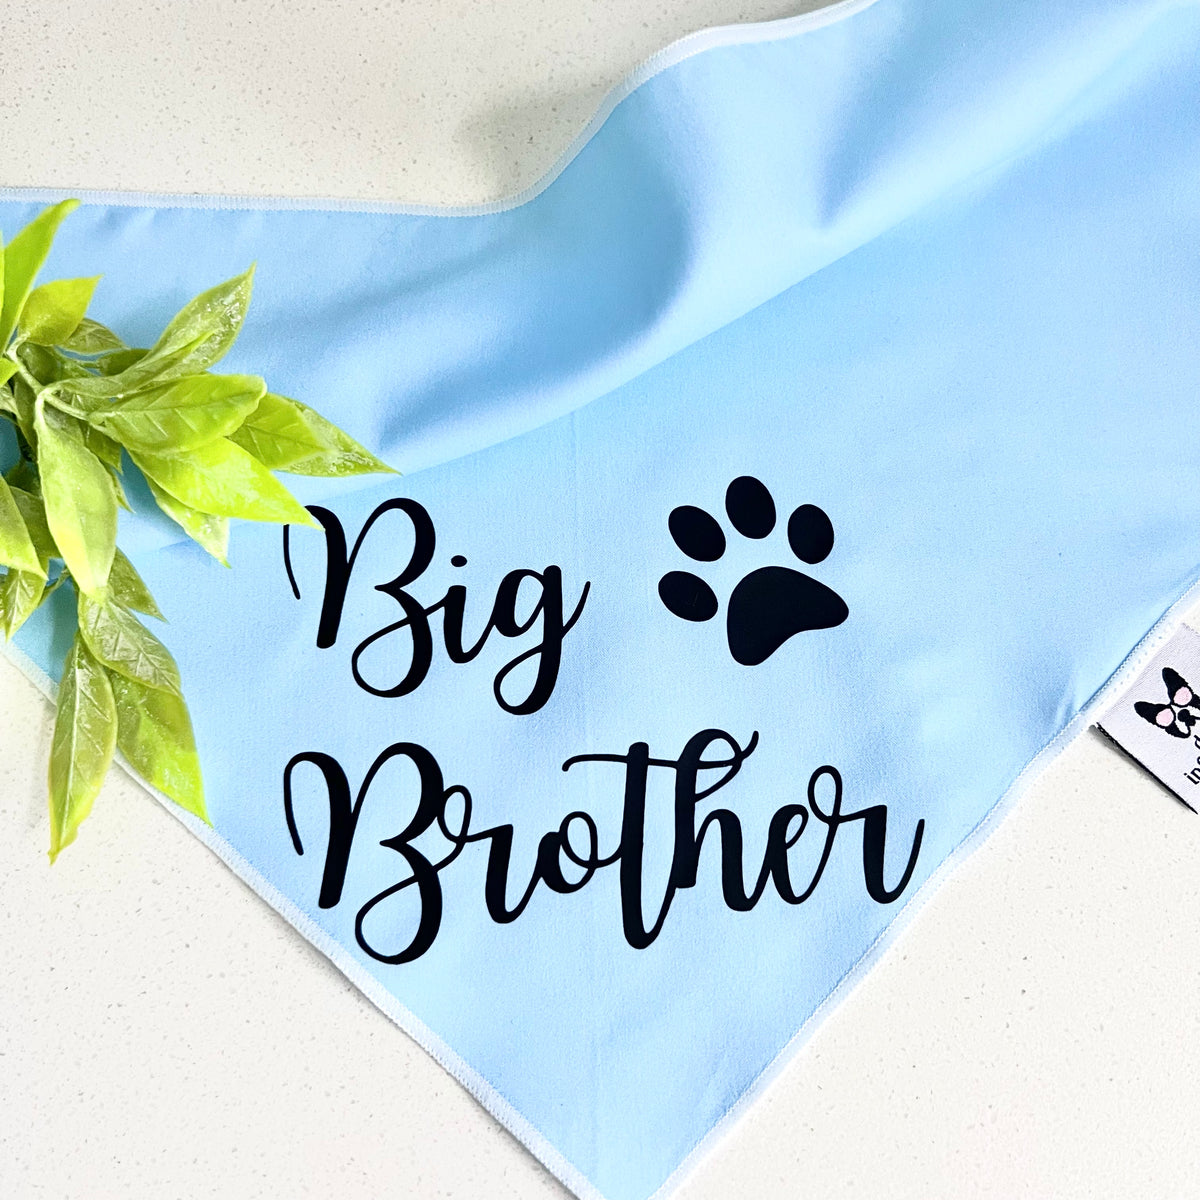 Dog Bandana - "Big Brother" with paw - Pregnancy or Birth Announcement